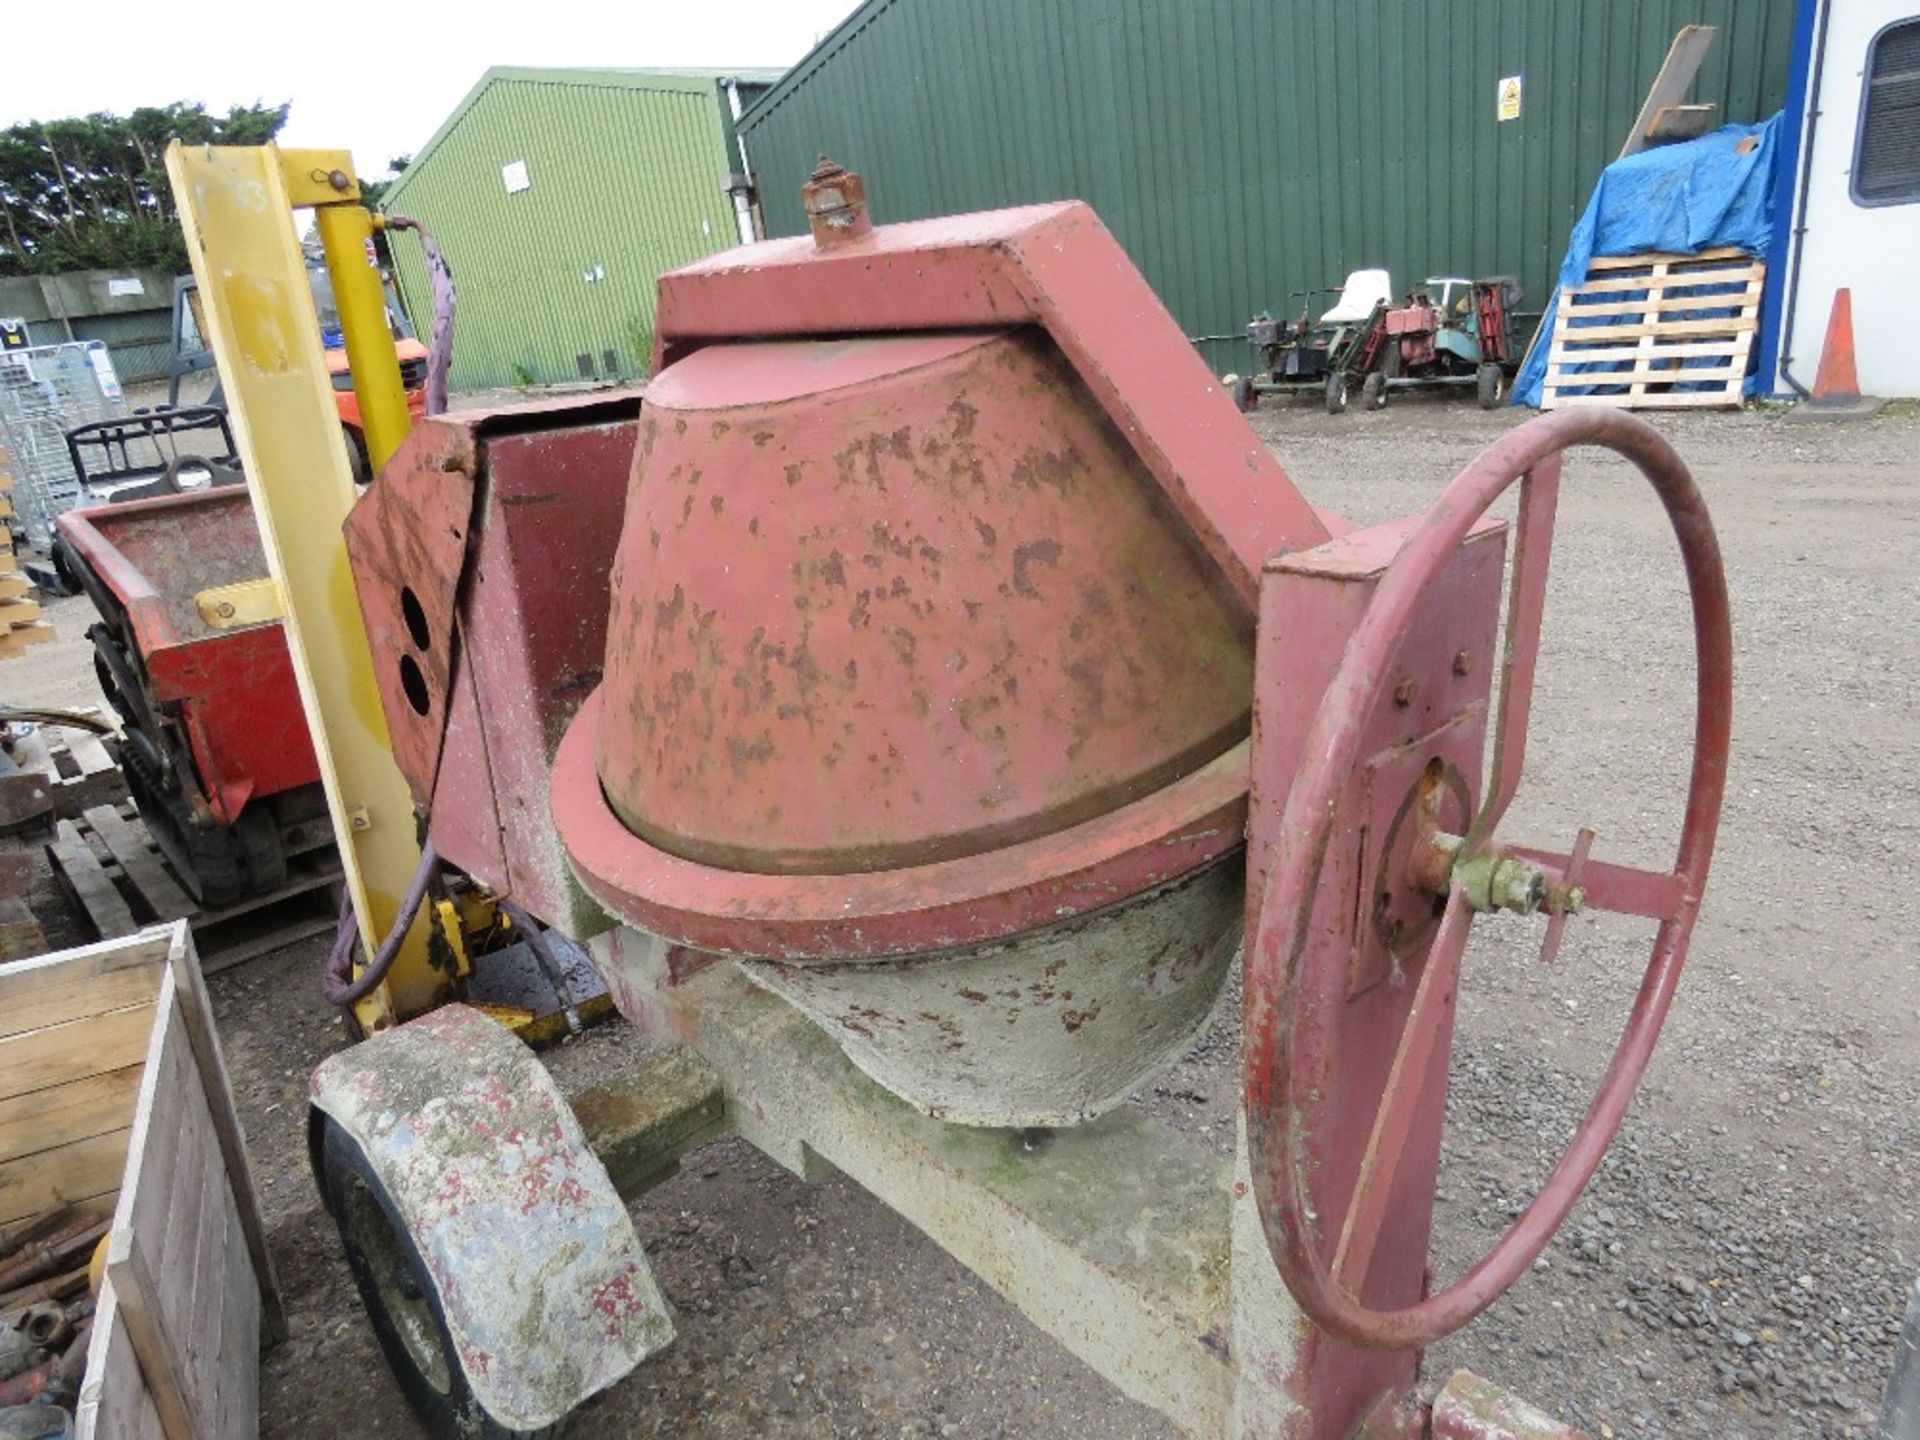 TOWED LISTER HANDLE START DIESEL ENGINED SITE MIXER. WHEN TESTED WAS SEEN TO START AND RUN AND DRUM - Image 3 of 3